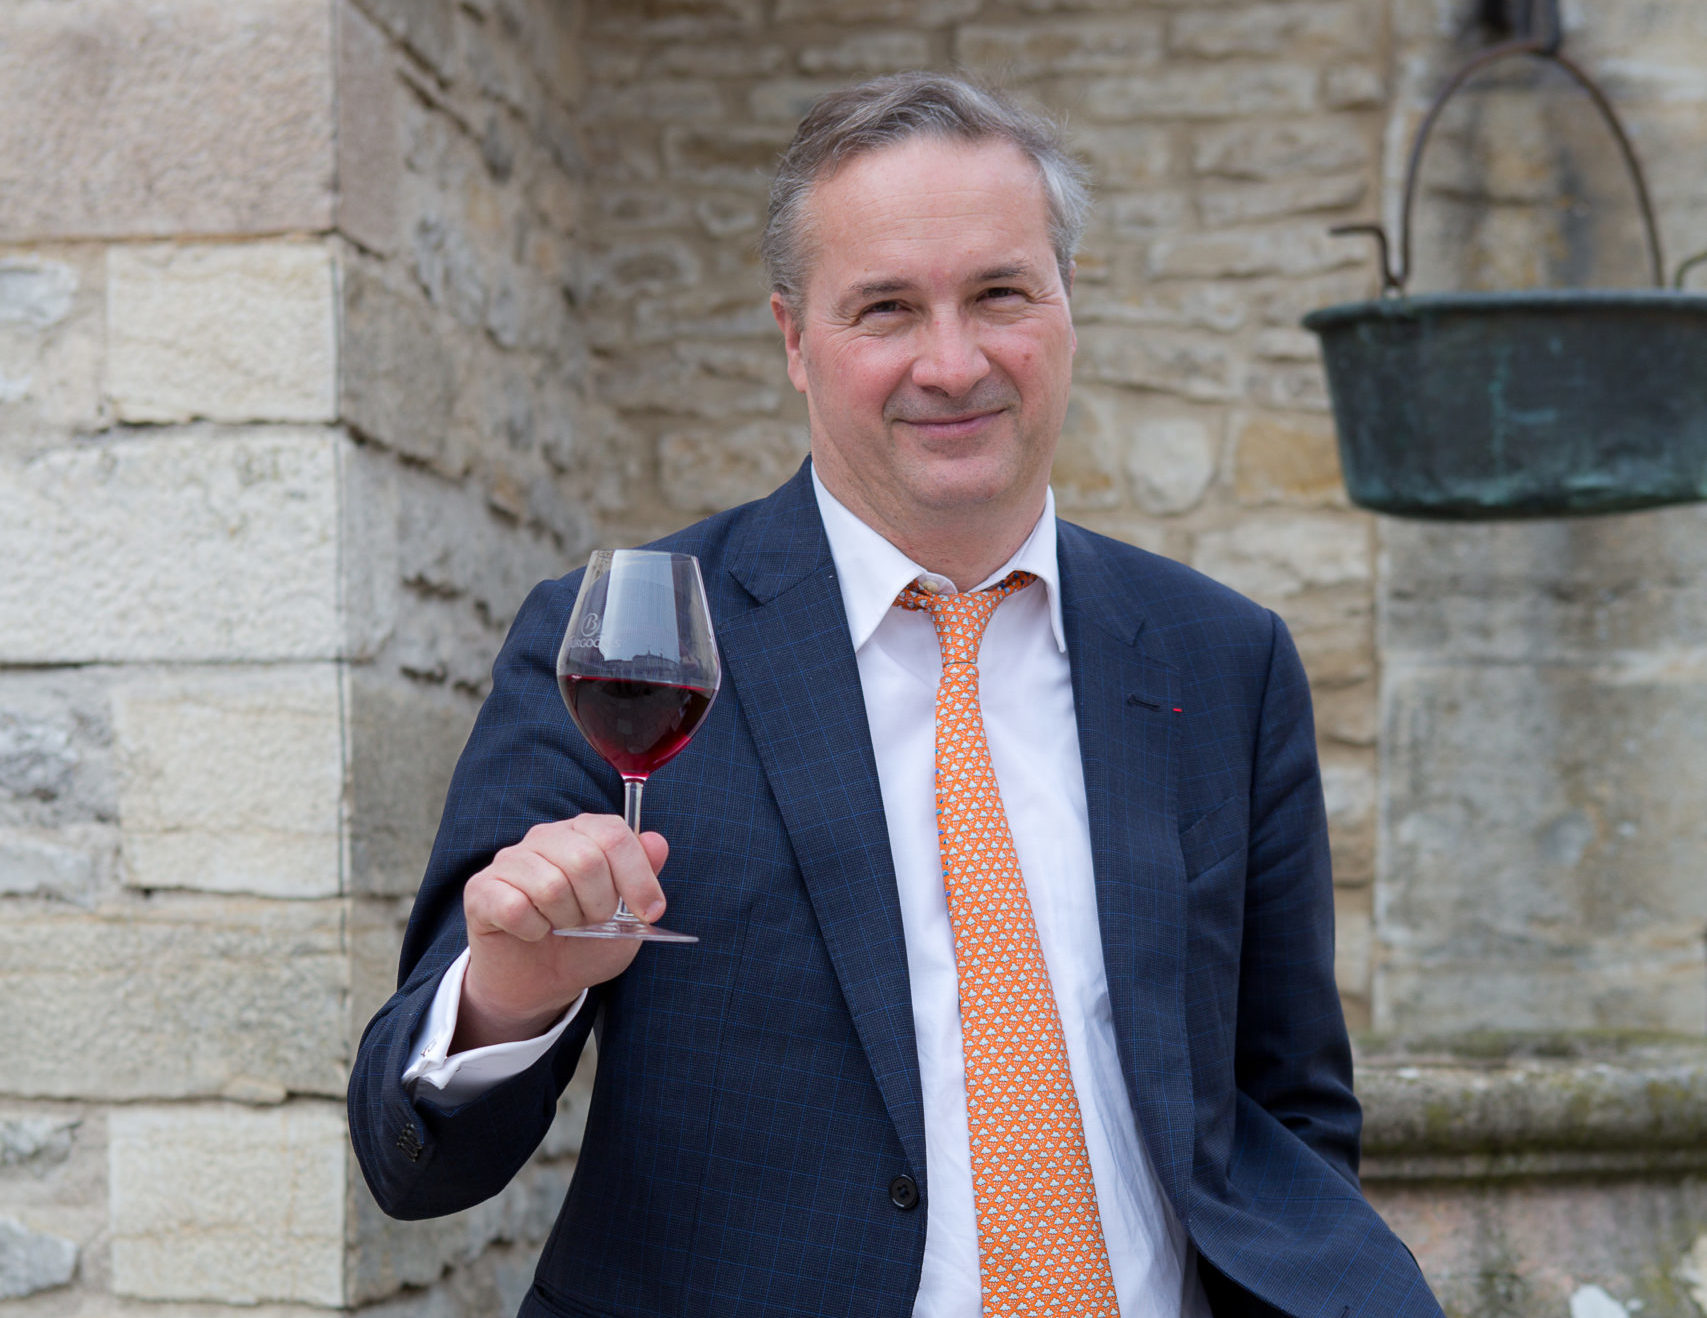 Louis-Fabrice Latour, the president of the Maison Louis Latour, dies at the age of 58